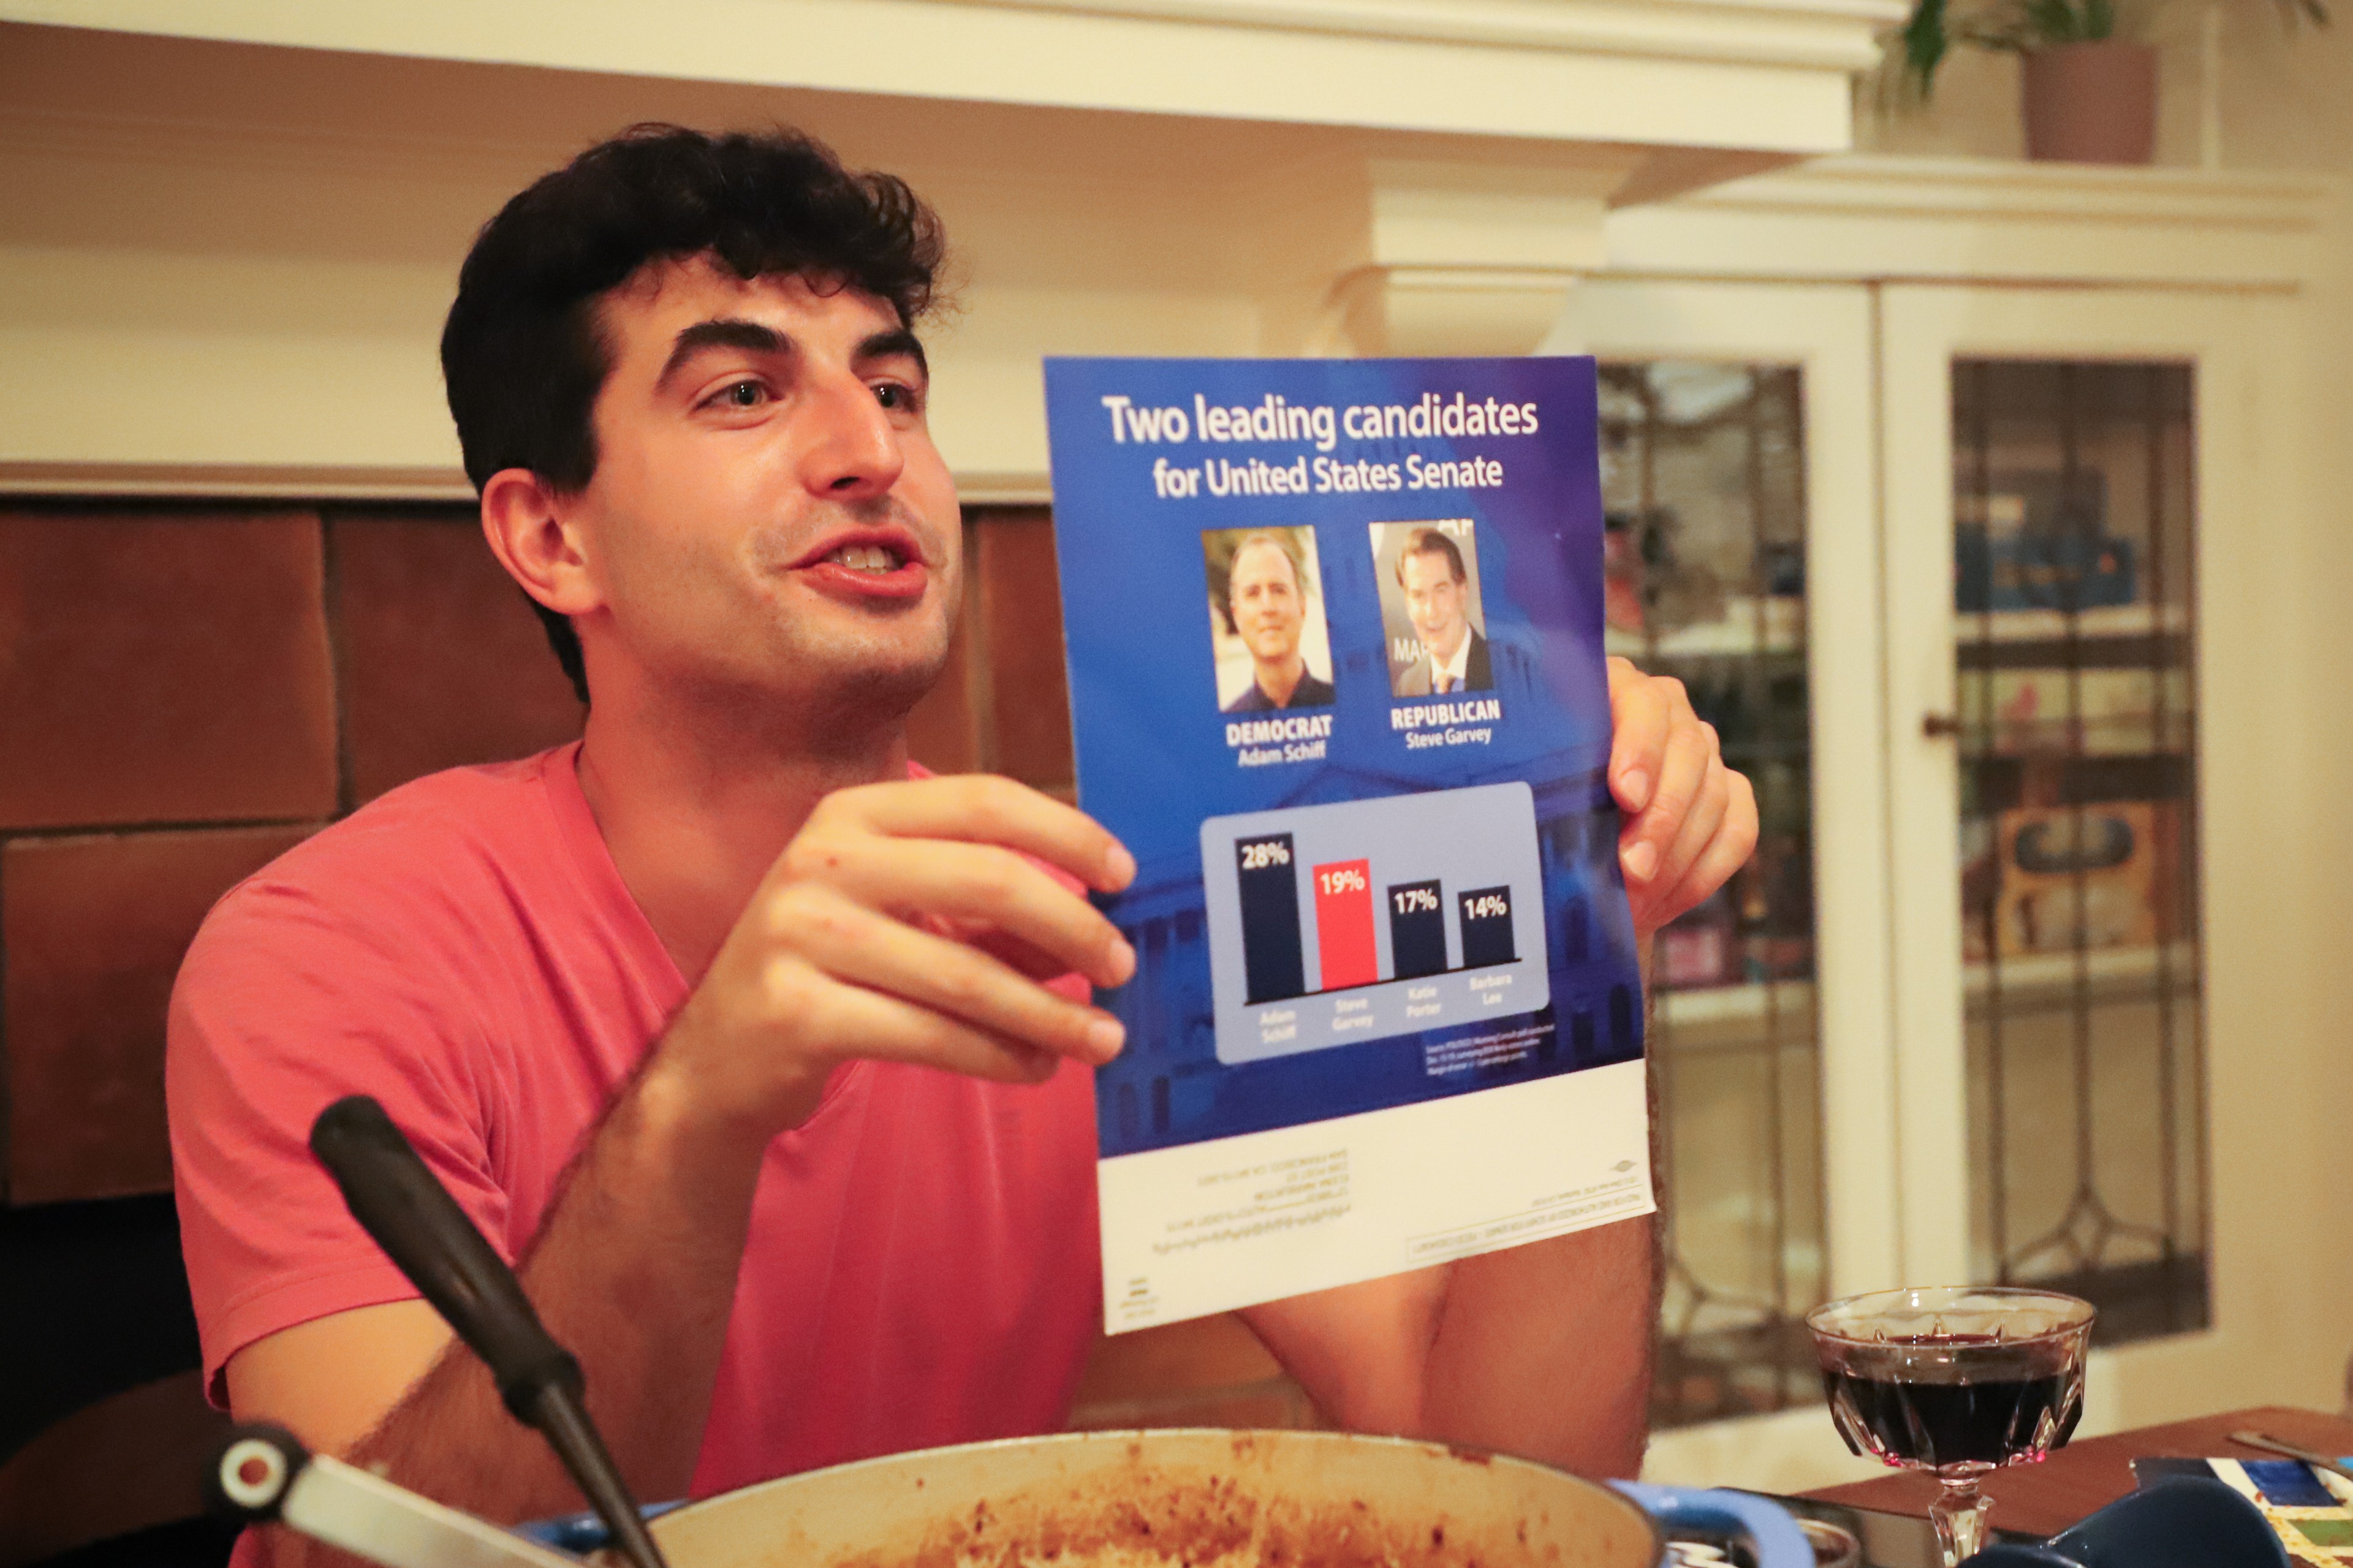 A man holds up a flyer comparing two US Senate candidates at a dinner table with a wine glass nearby.